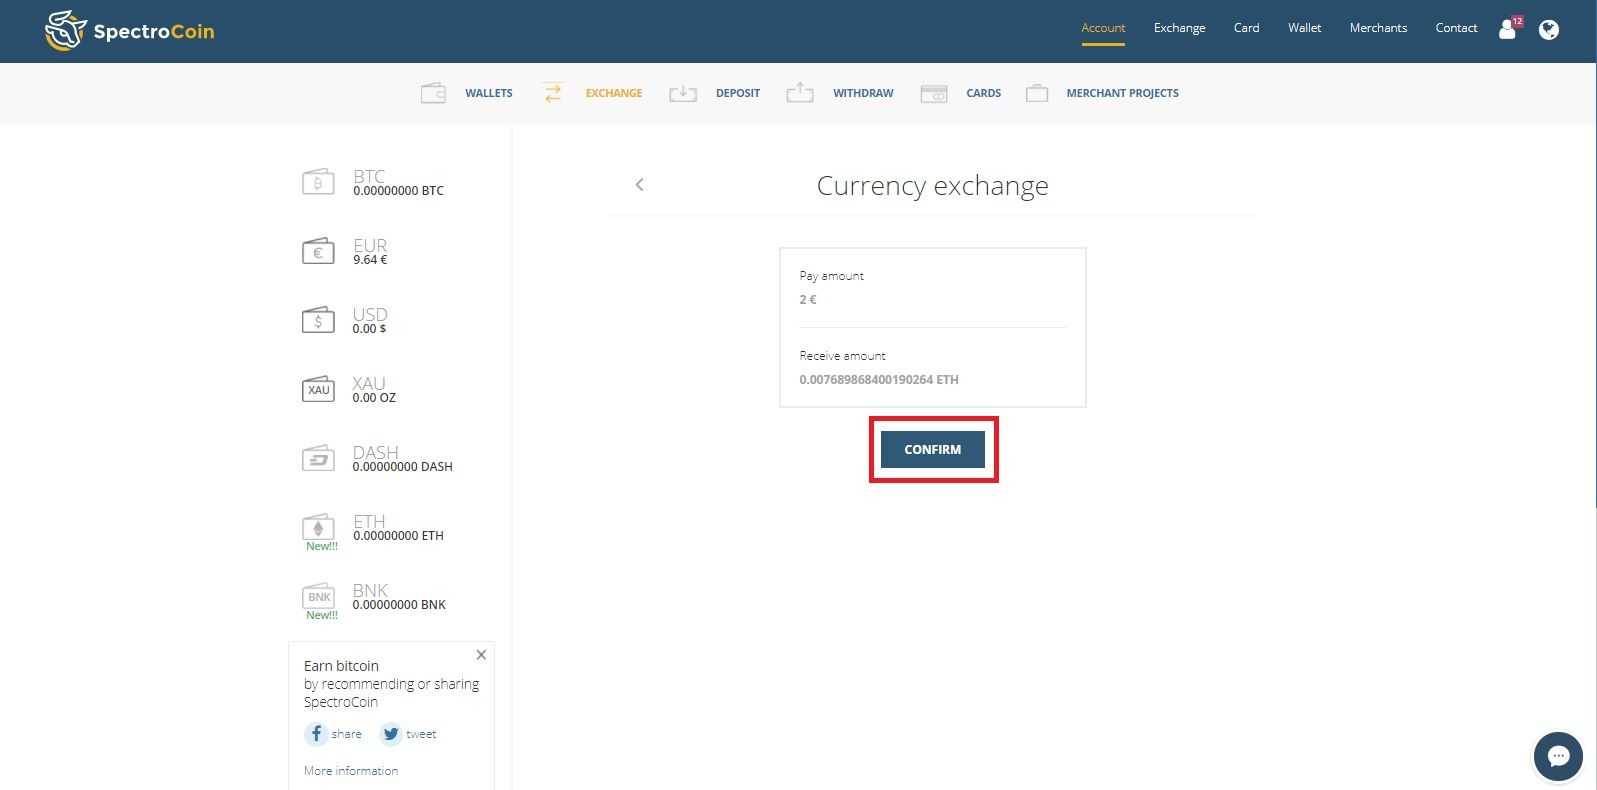 SpectroCoin "EUR to ETH" exchange page with highlighted "confirm" button